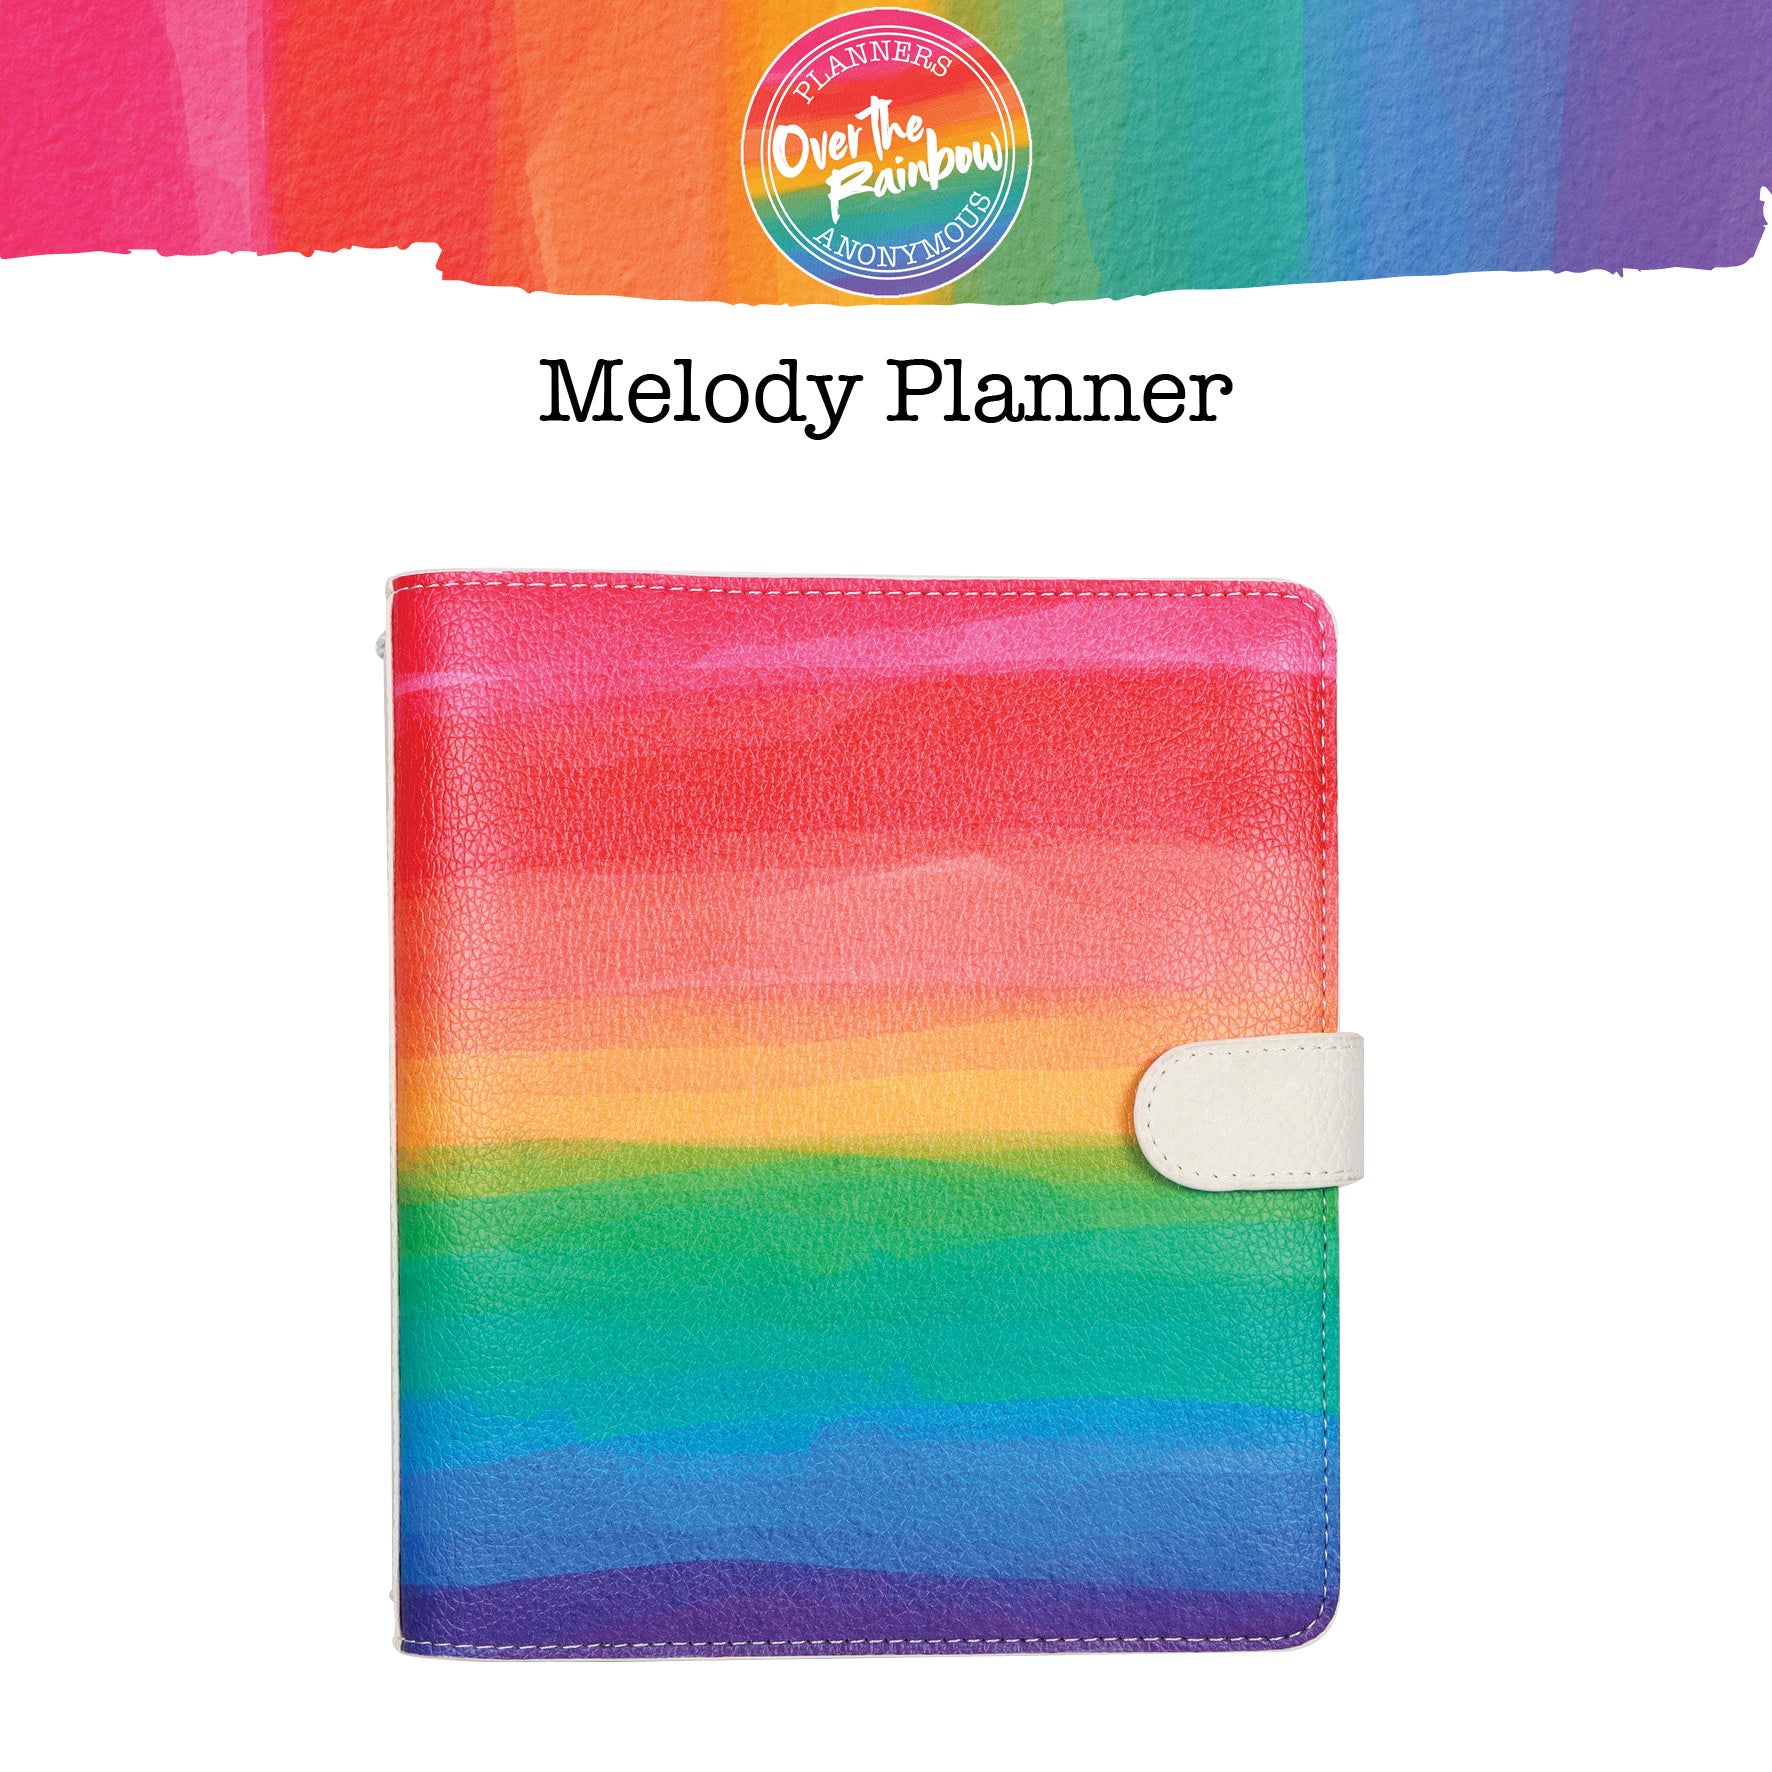 Over the Rainbow B6+ Melody Planner